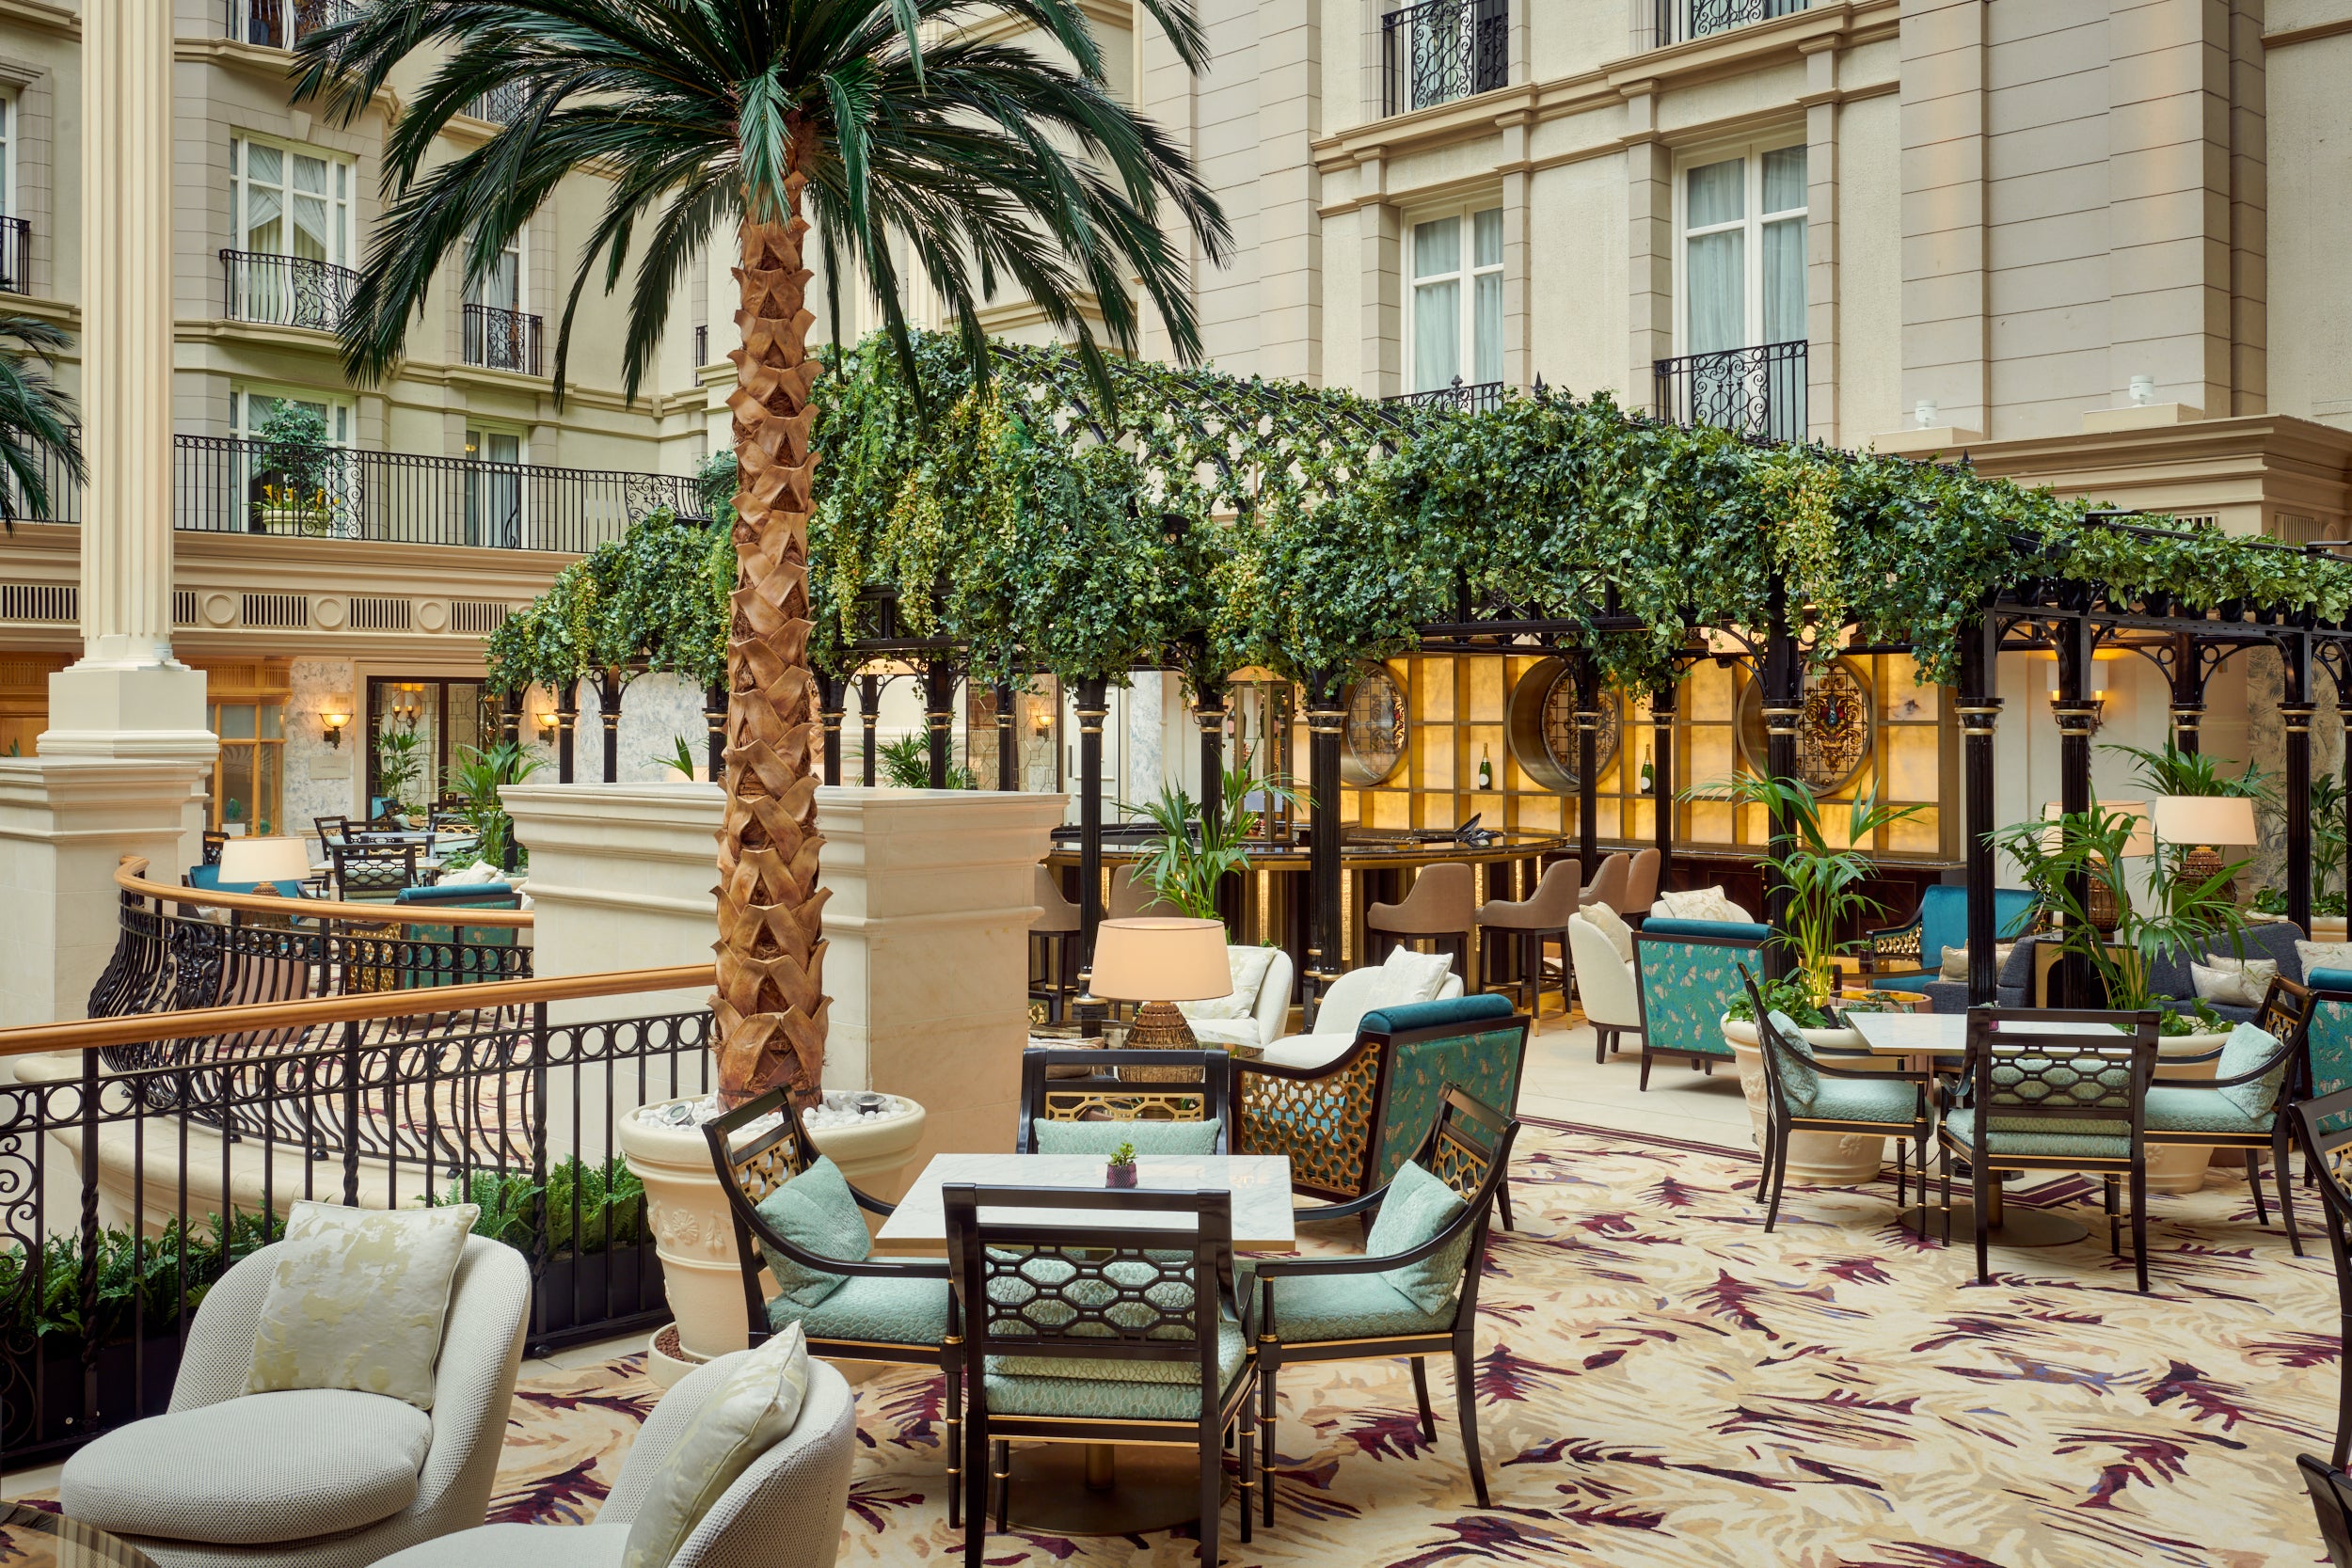 The Landmark’s Champagne Bar within its Winter Garden still makes for a magical sun spot